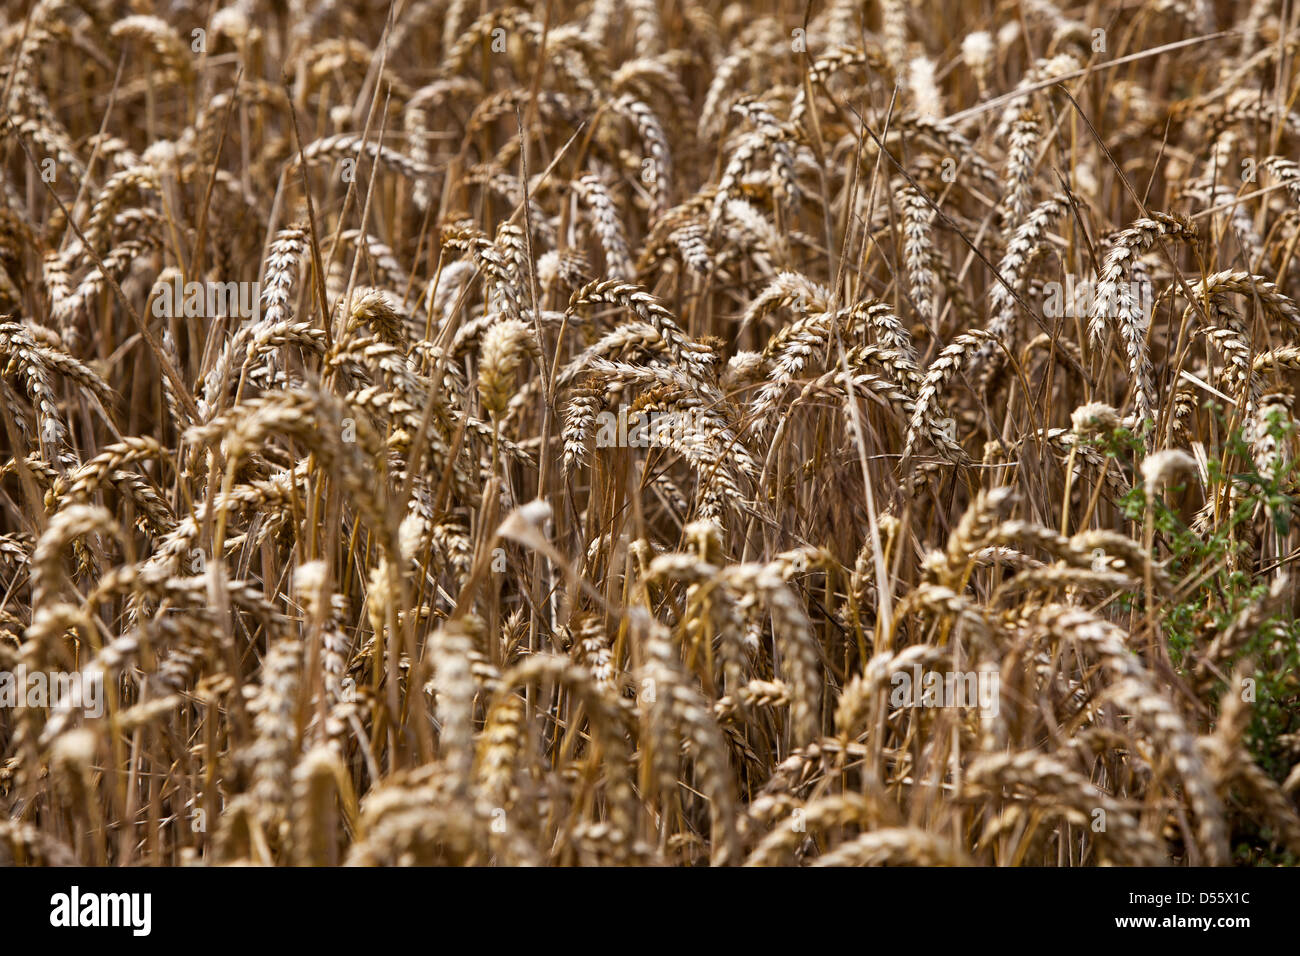 Grain Heads High Resolution Stock Photography and Images - Alamy